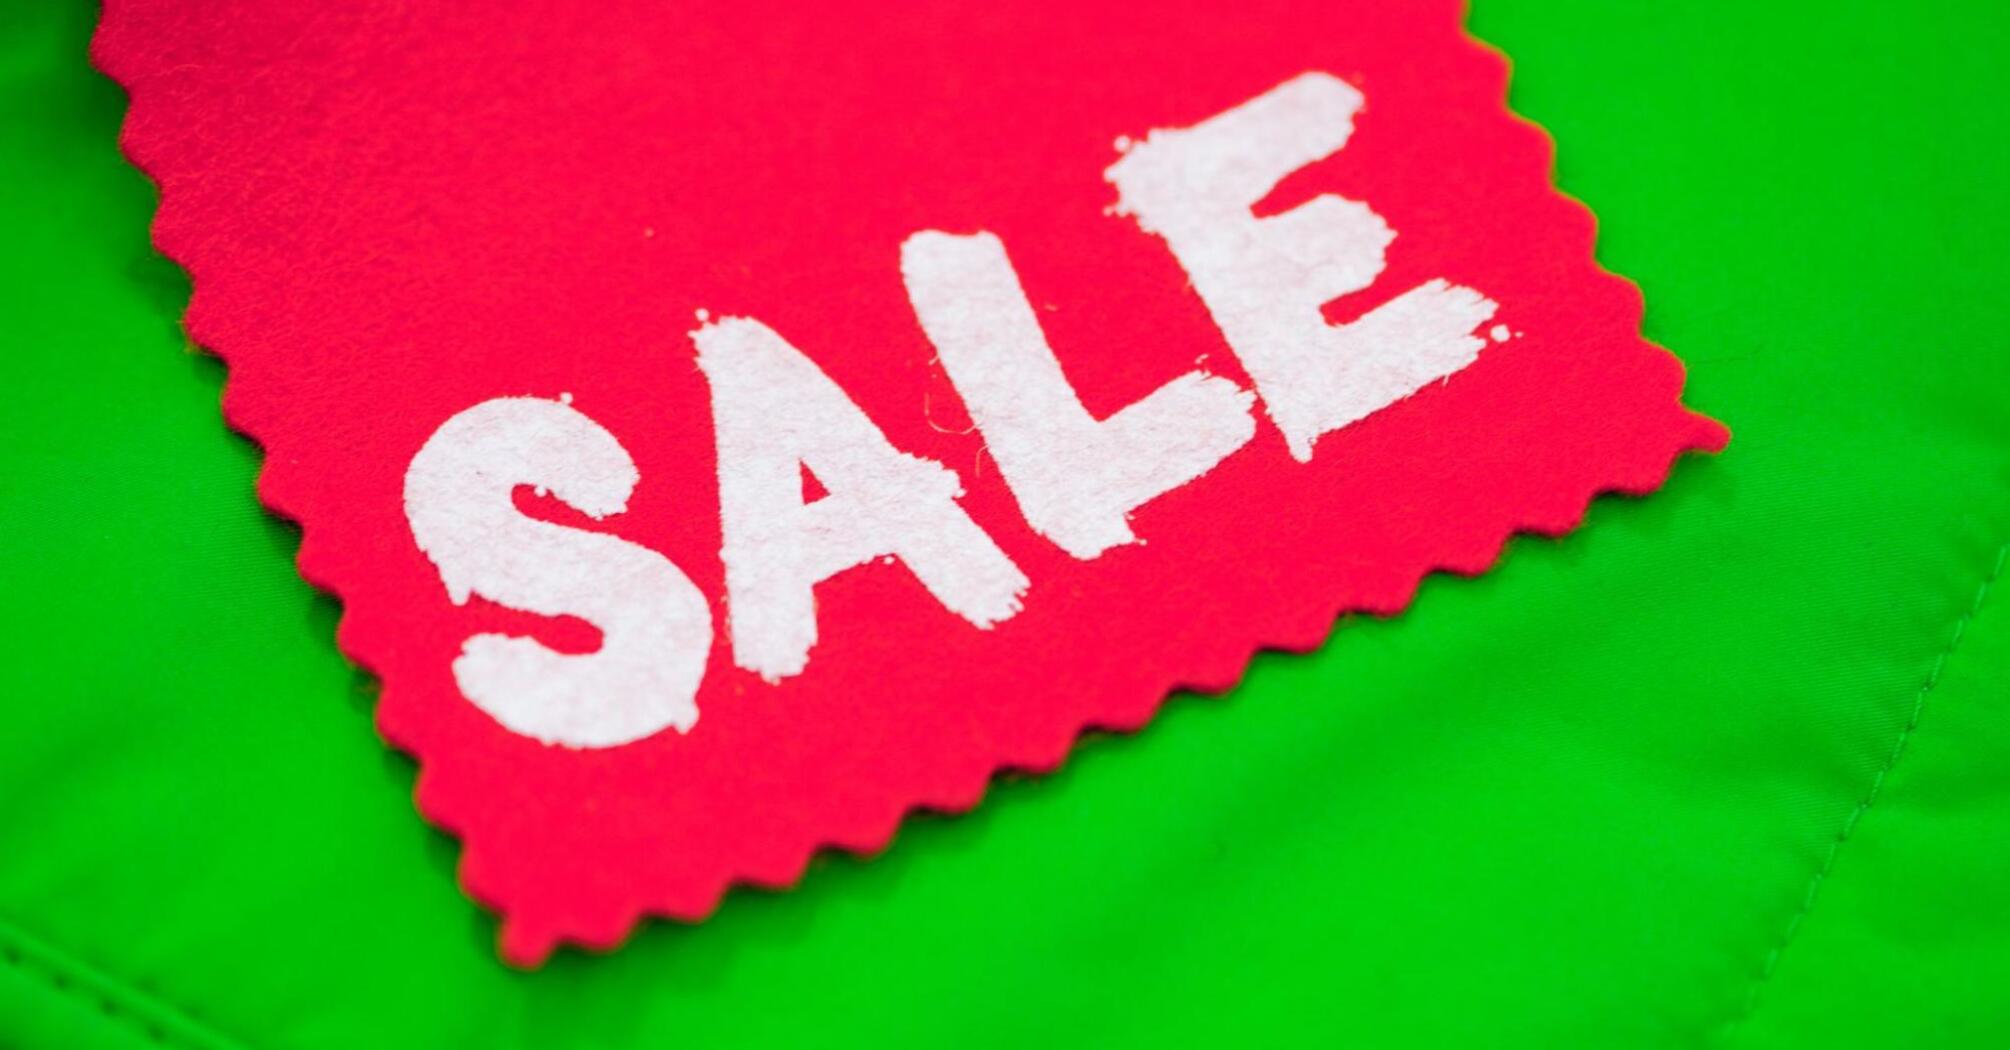 Sold out sign on green background